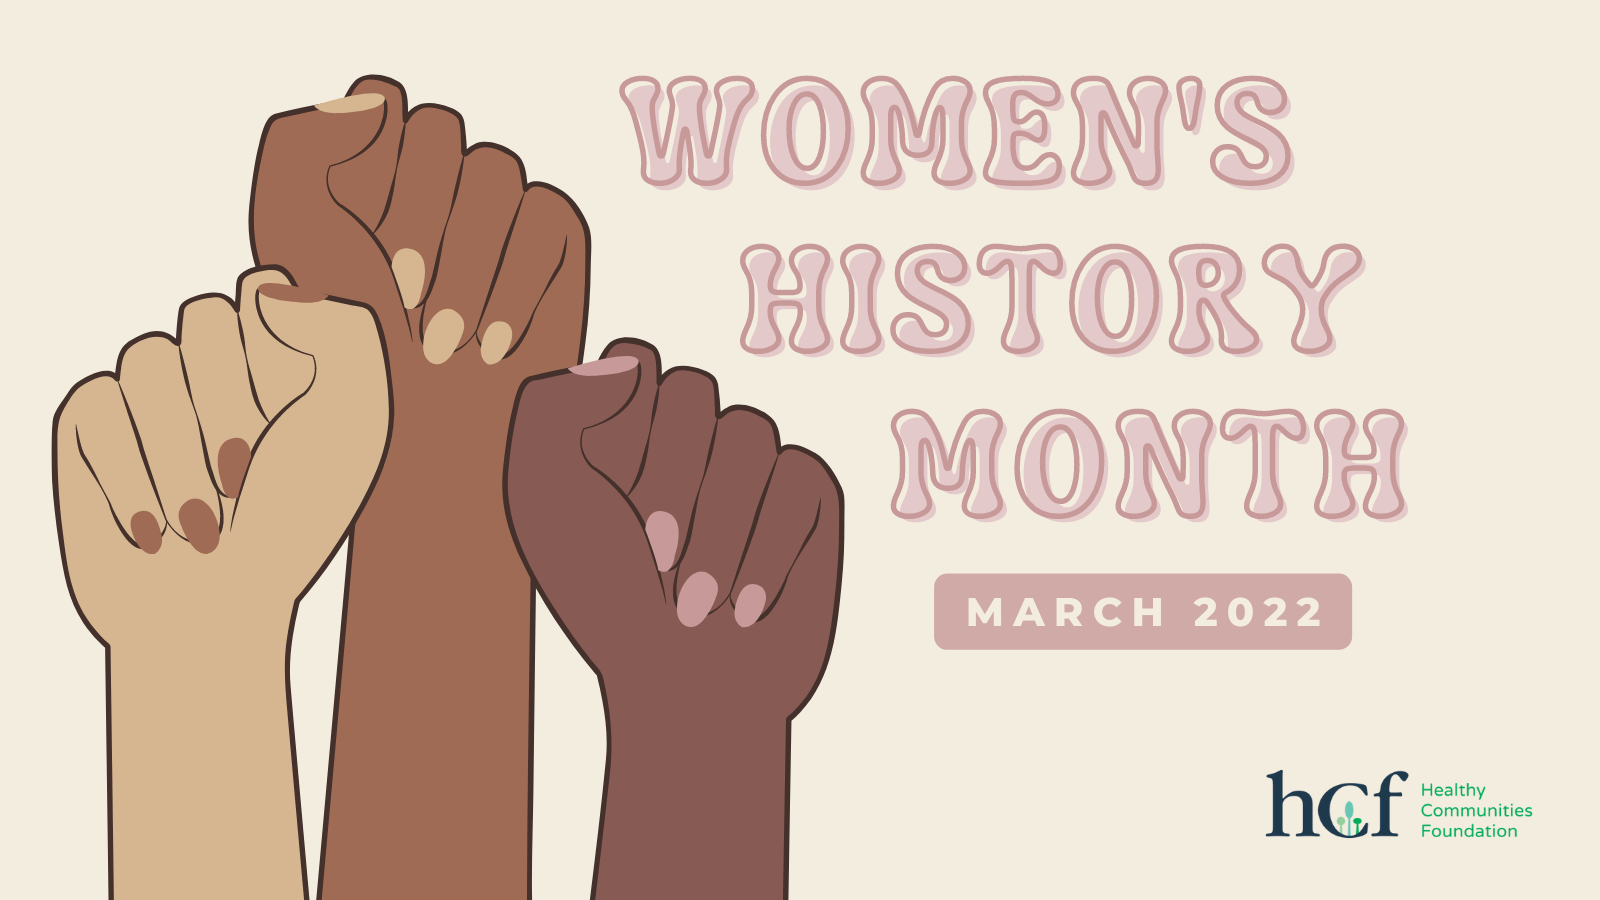 three fists held up; reads: "Women's History Month March 2022"